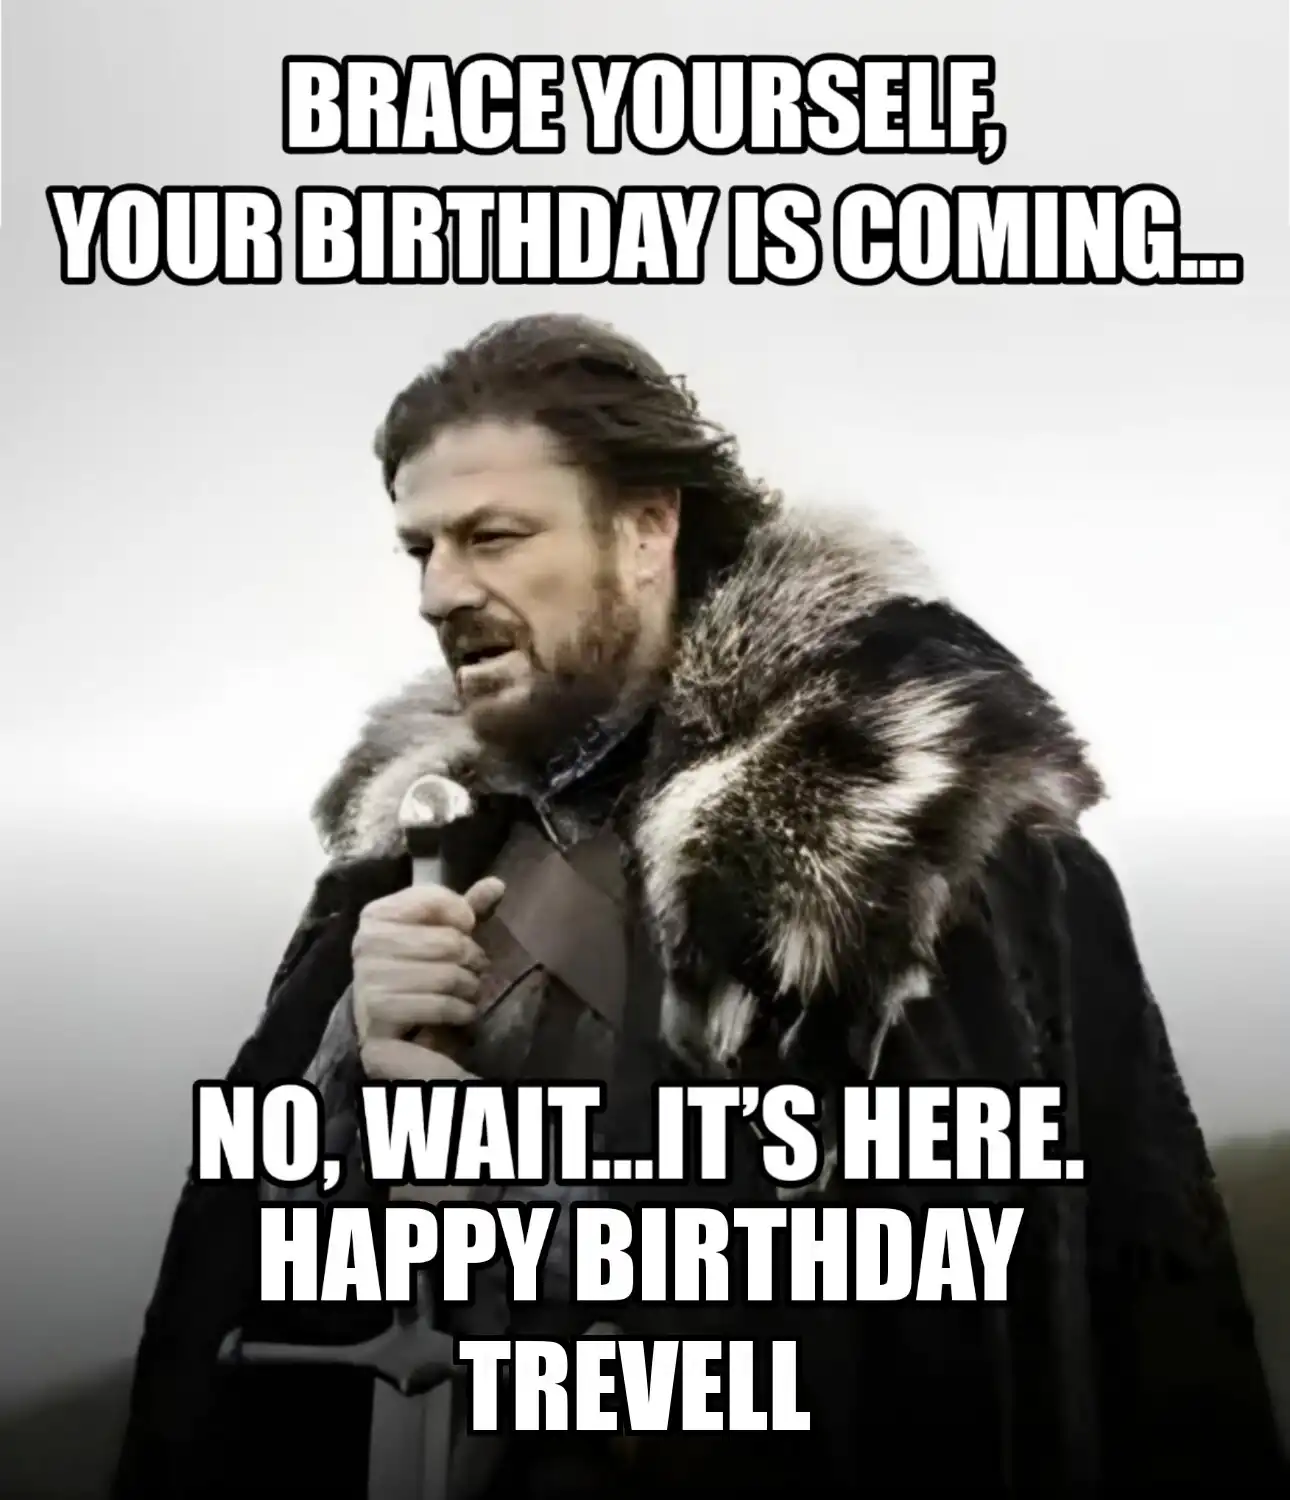 Happy Birthday Trevell Brace Yourself Your Birthday Is Coming Meme